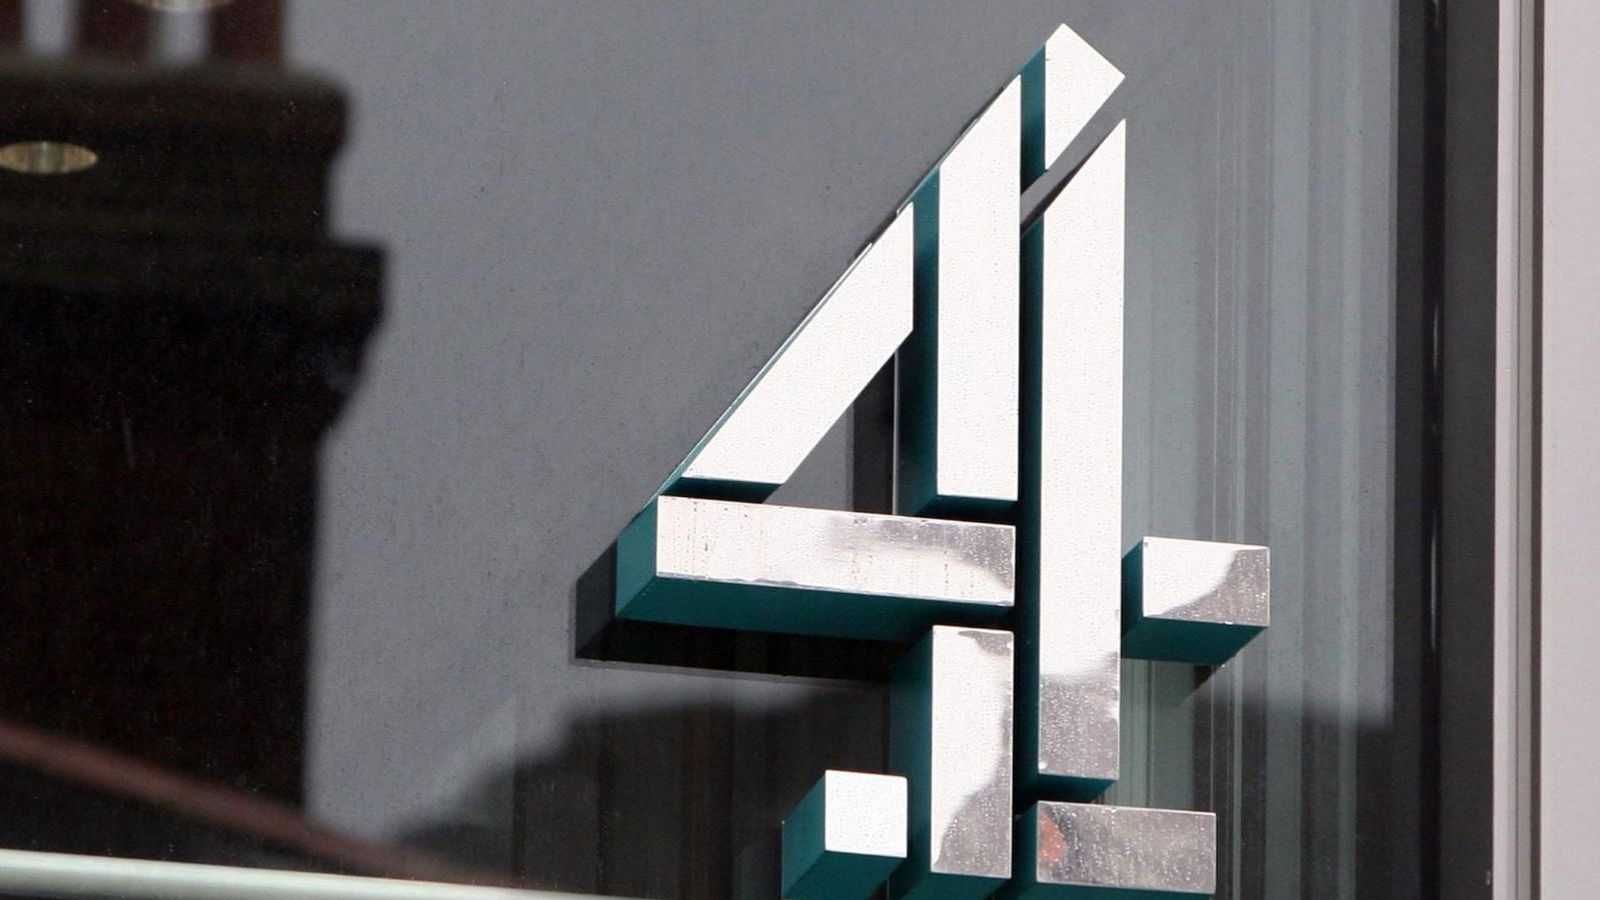 Plans to privatise Channel 4 to be scrapped by Culture Secretary Michelle Donelan, reports suggest